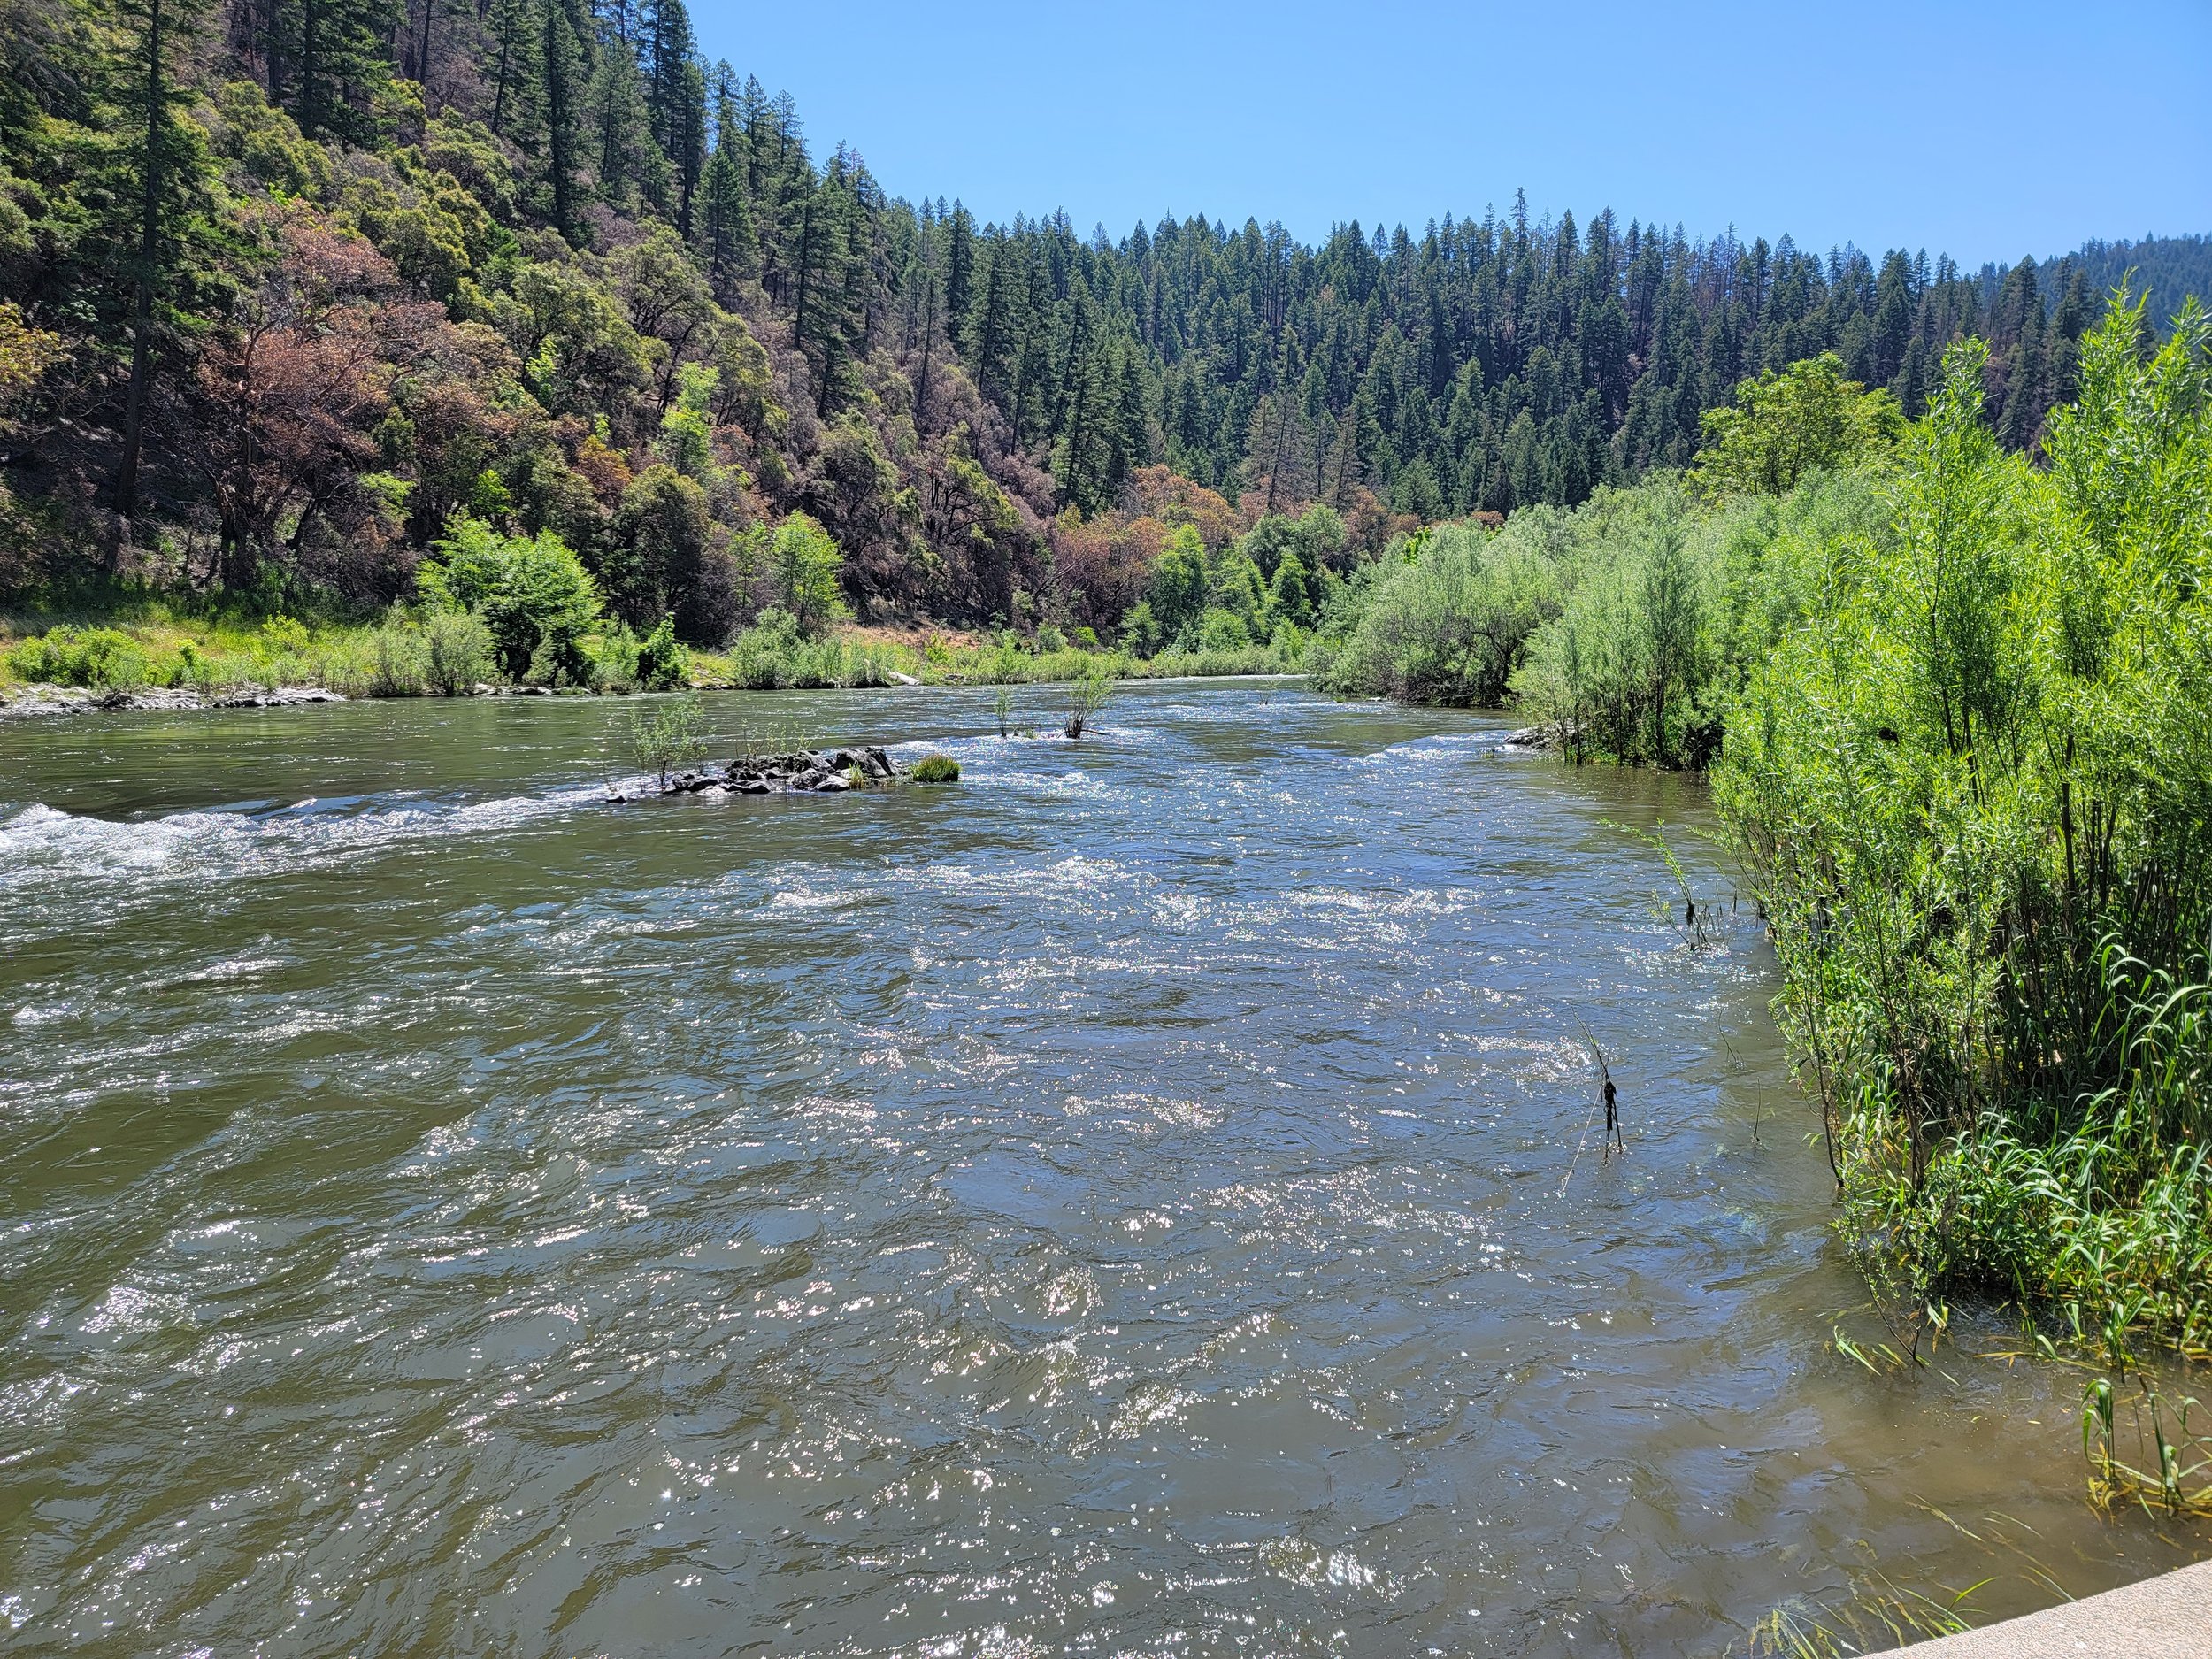  The pass gets you down to the small “town” of Galice, which is also on the Rogue River. Tons of trucks just bring rafts up the river through the pass. Very sketchy. 